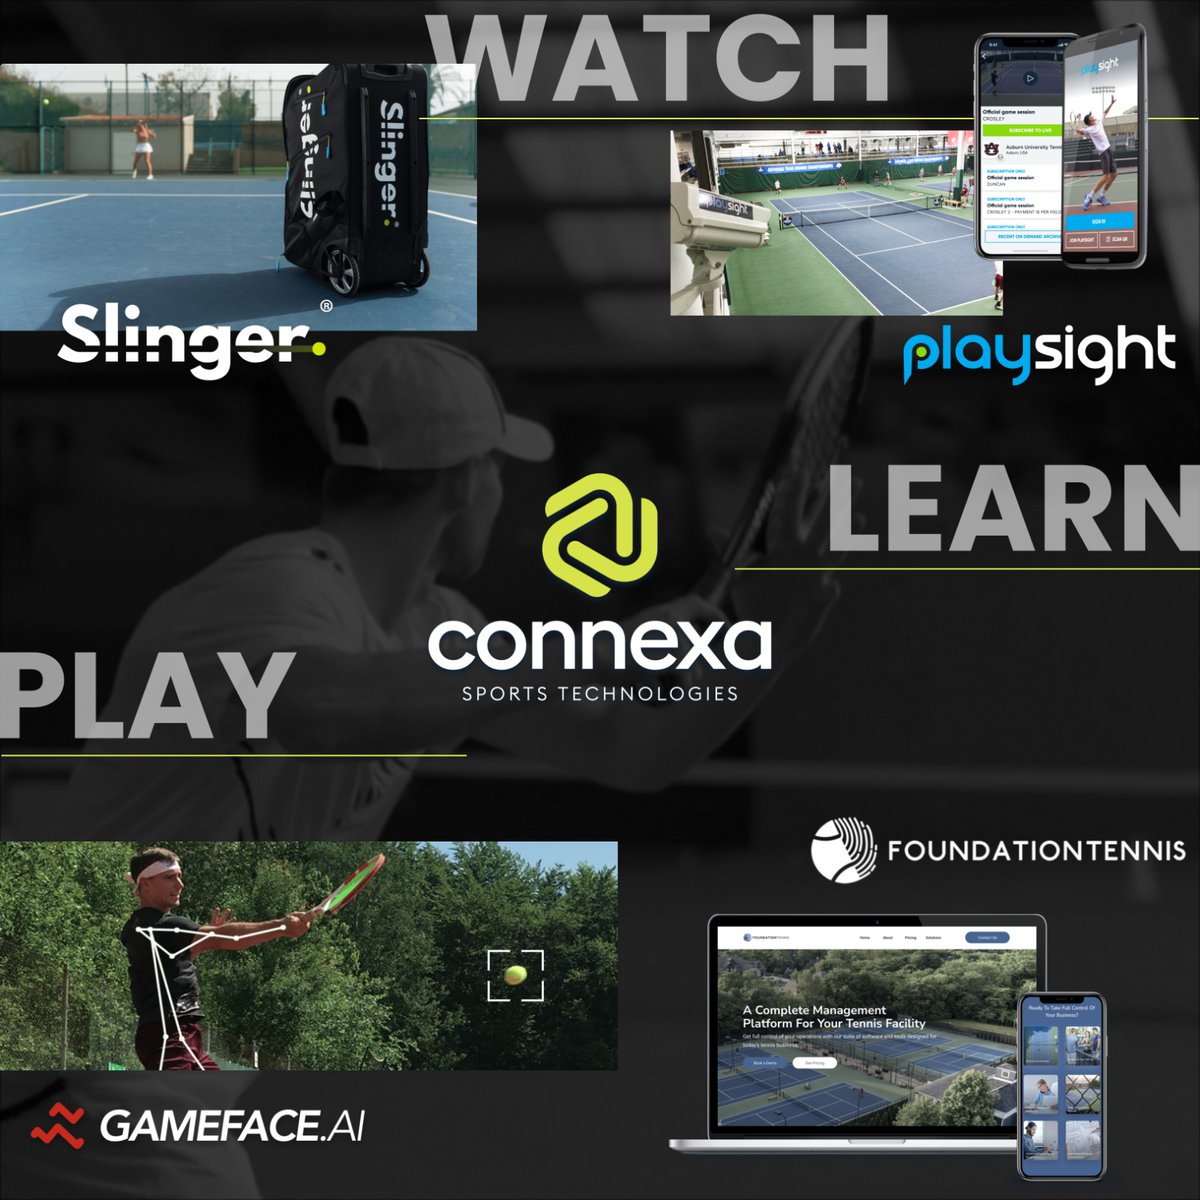 We are excited to announce the launch of Connexa Sports Technology, a connected sports company that brings together Slinger, PlaySight, GAMEFACE.AI and Foundation Sports. 

Press Release: connexasports.com/news/?qmodStor…